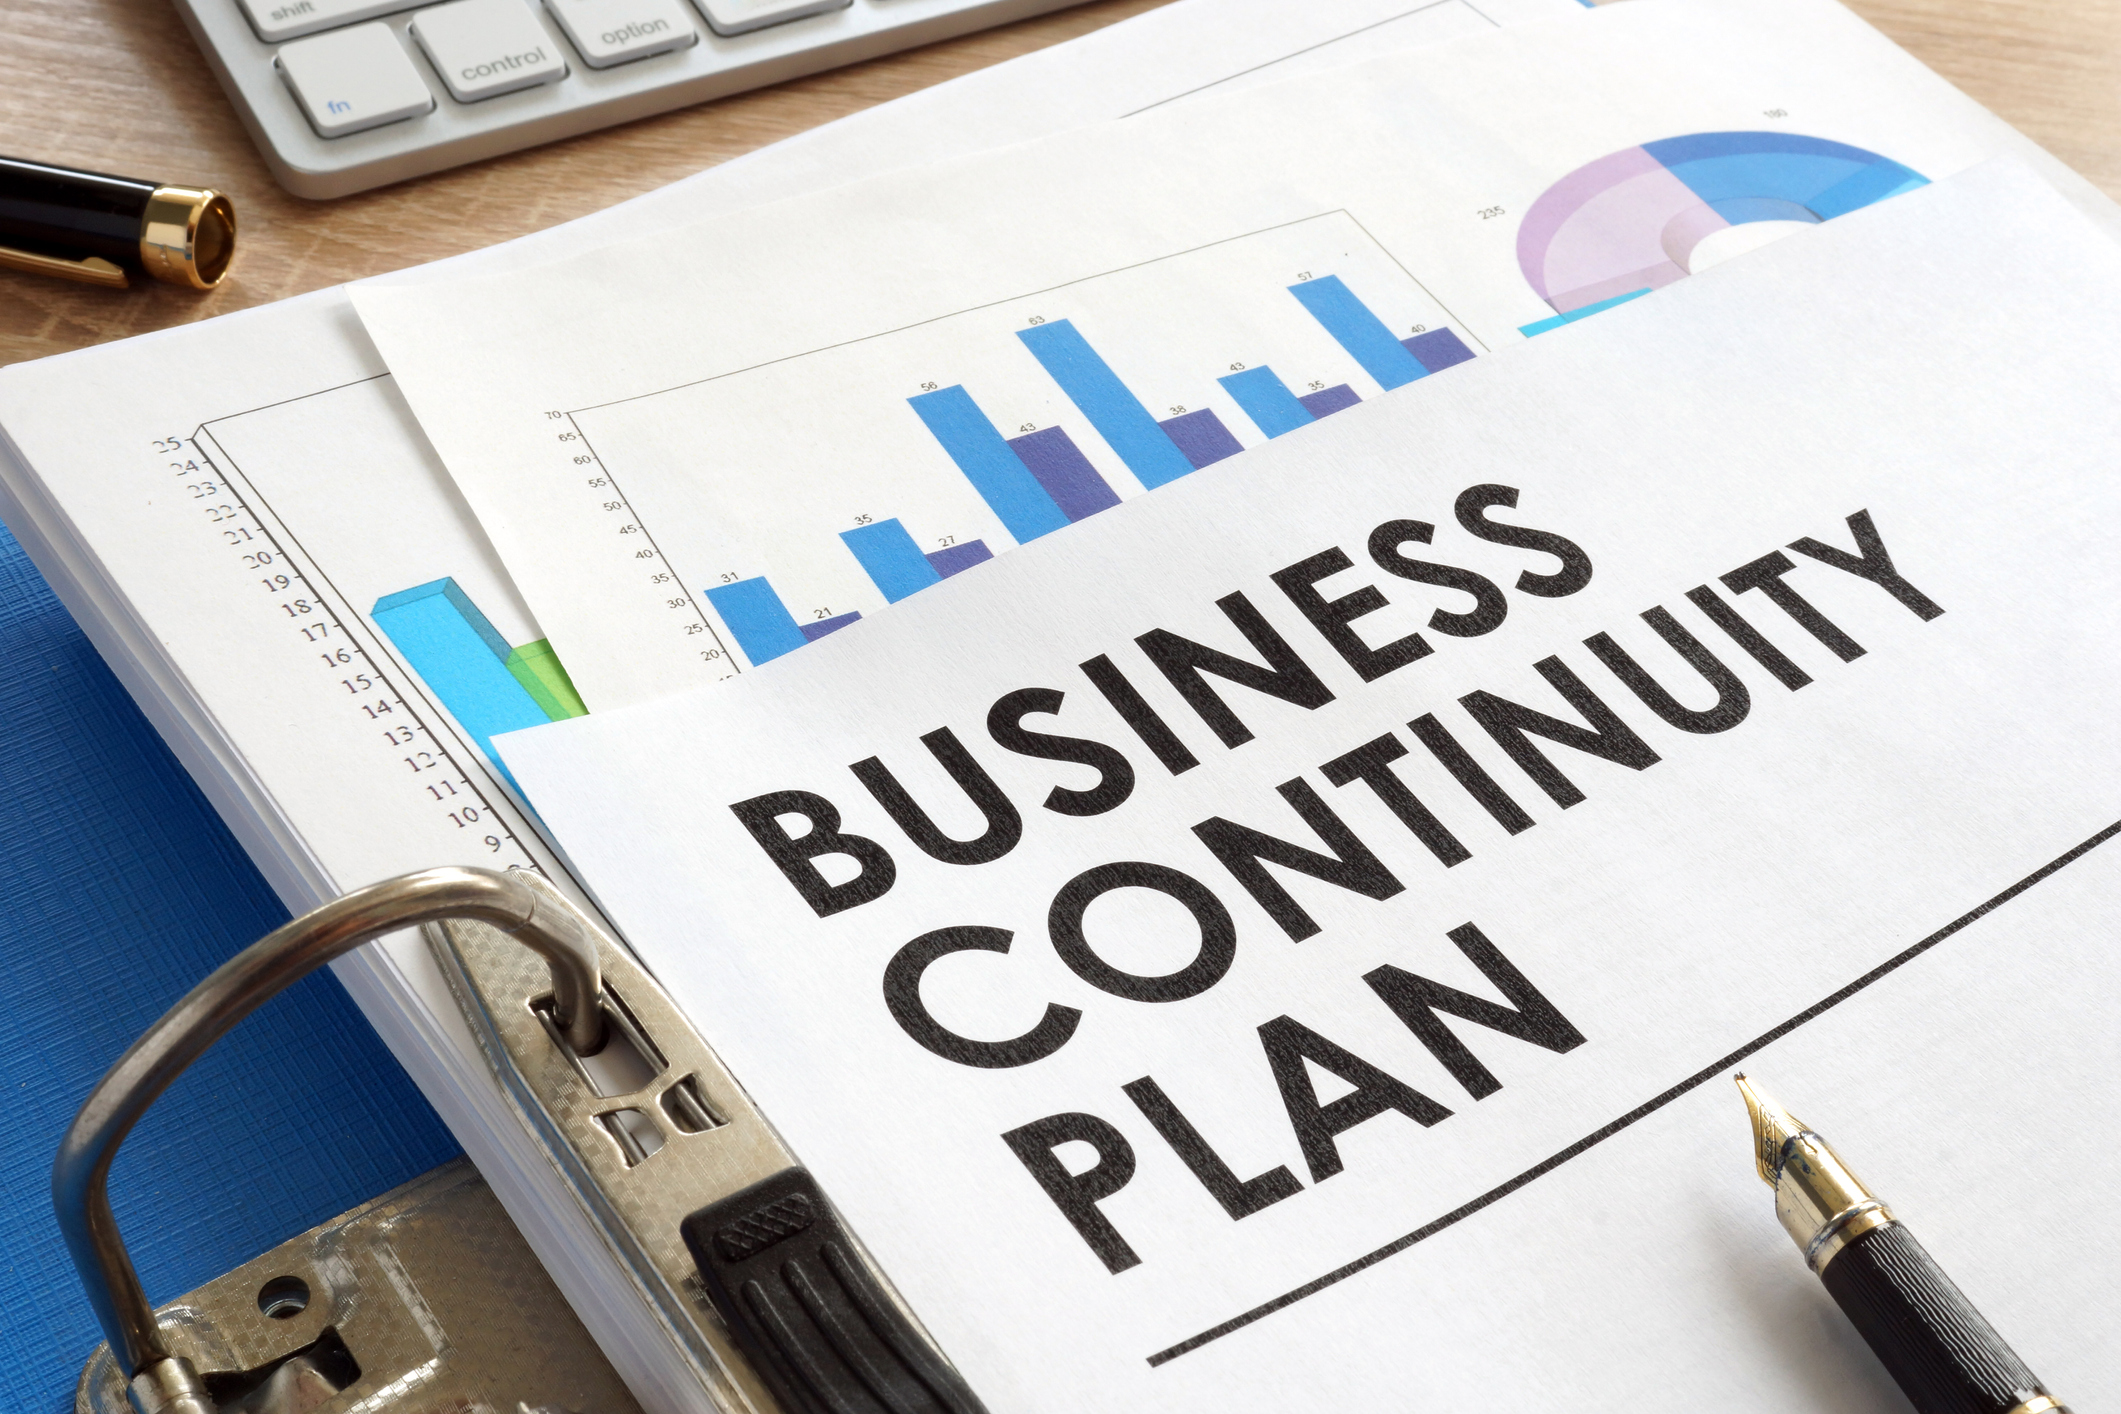 Business Continuity Planning: Why It’s Important